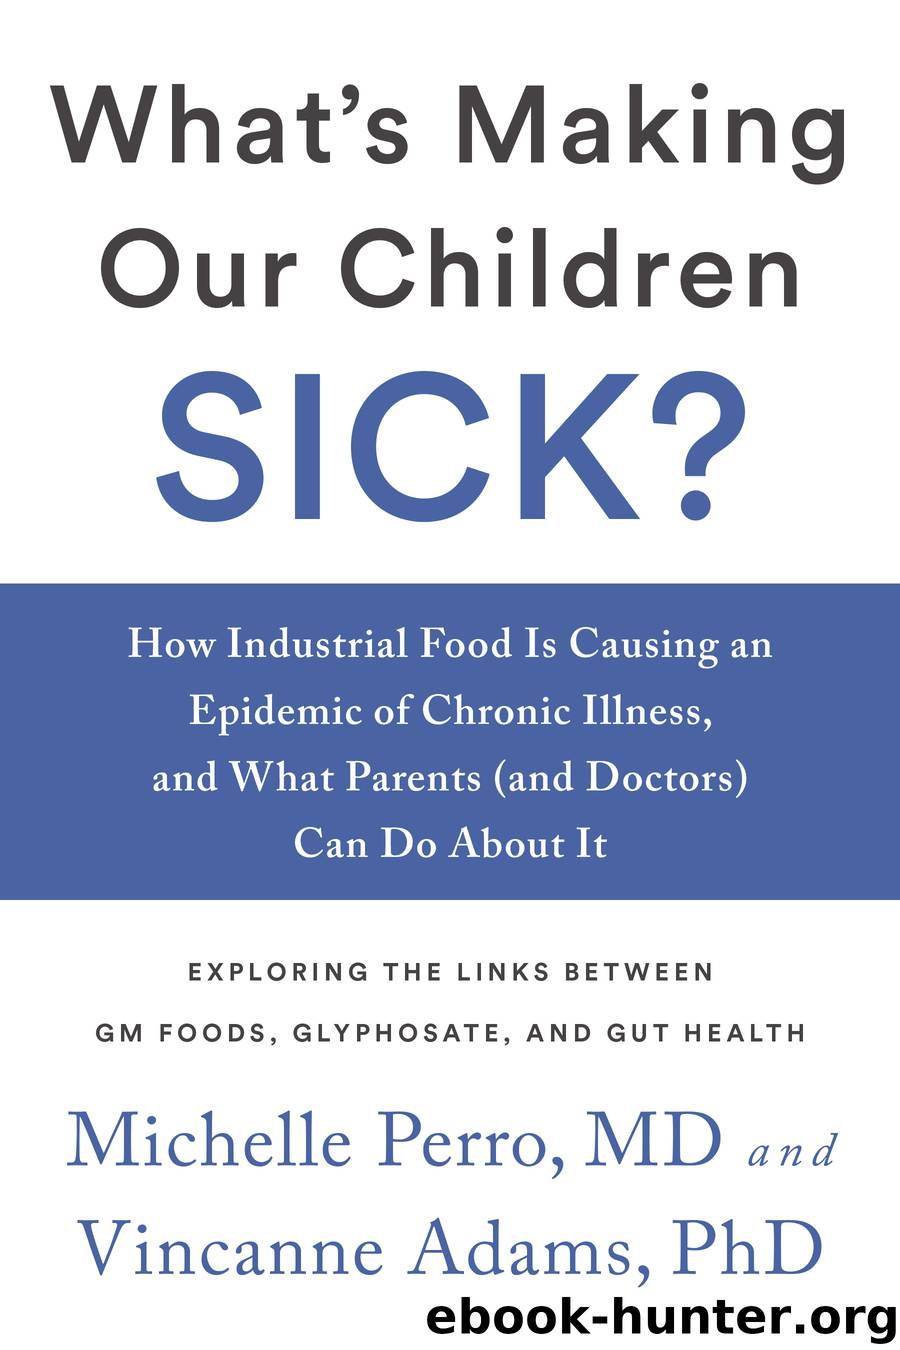 What's Making Our Children Sick? by Michelle Perro